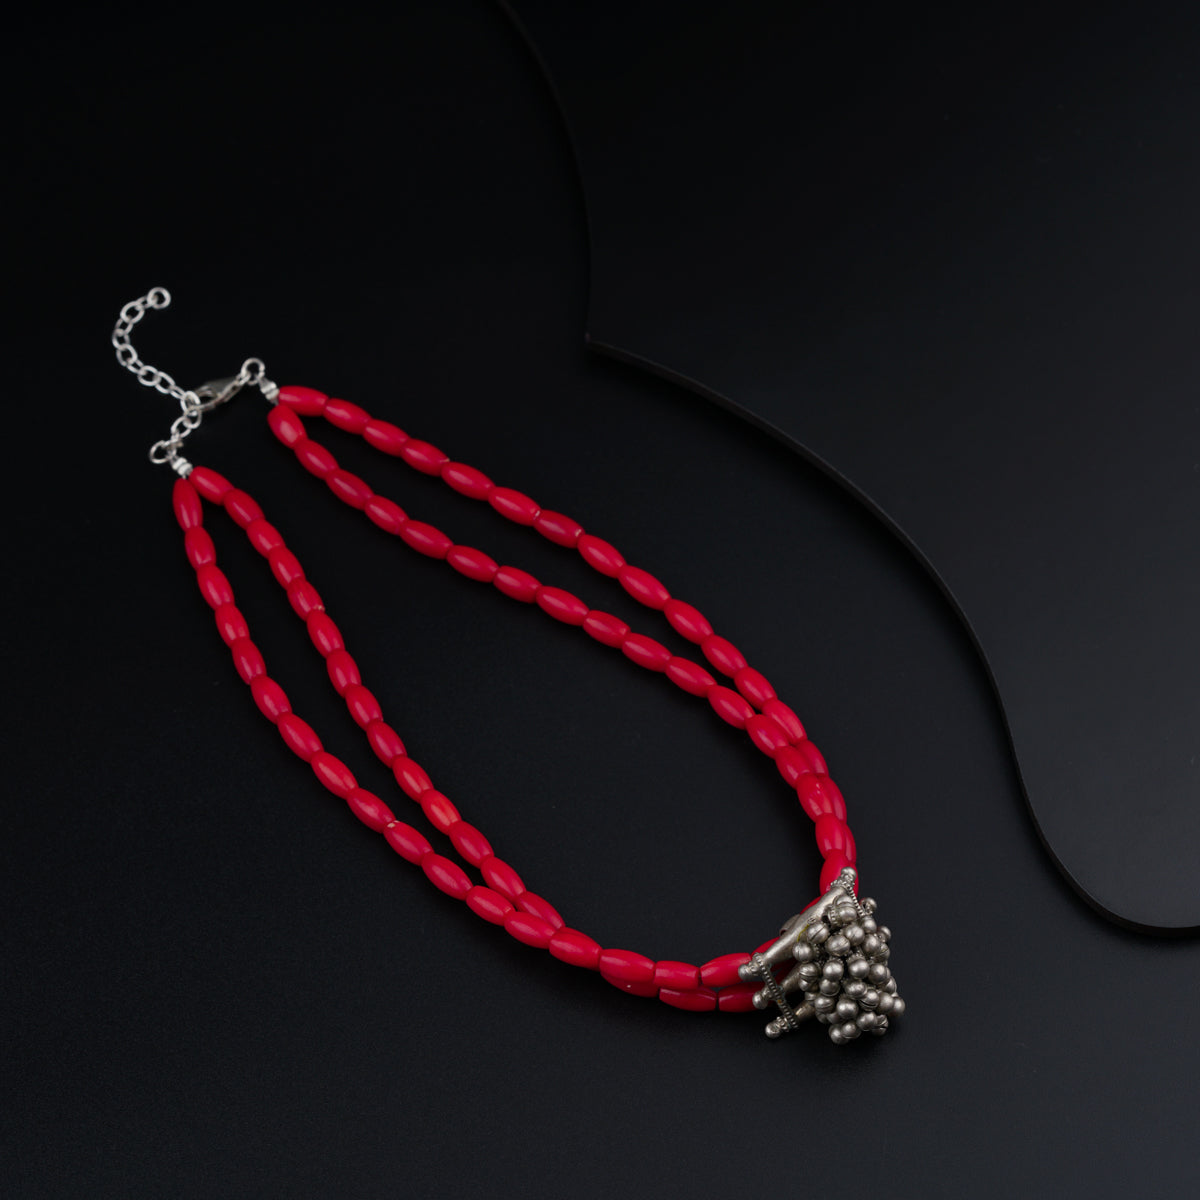 a red necklace with silver beads and a chain